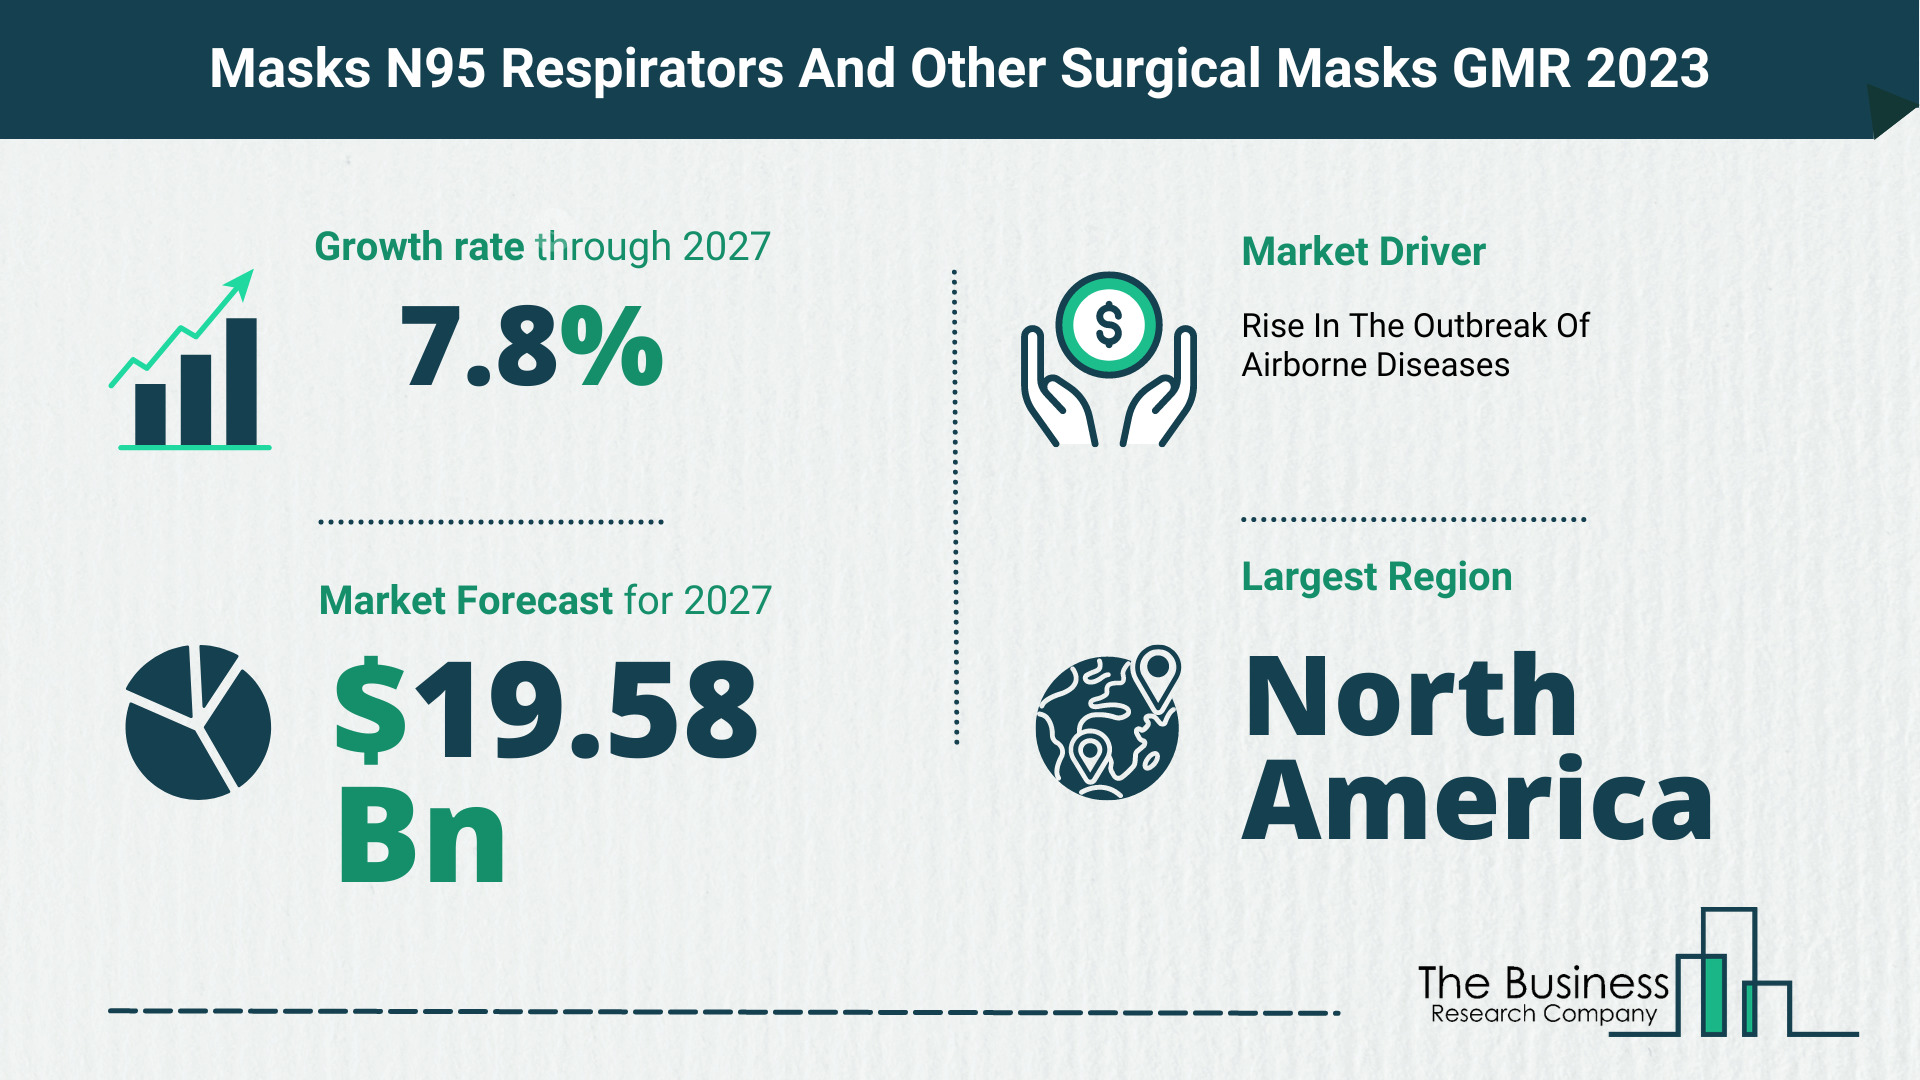 Masks N95 Respirators And Other Surgical Masks Market Forecast 2023-2027 By The Business Research Company